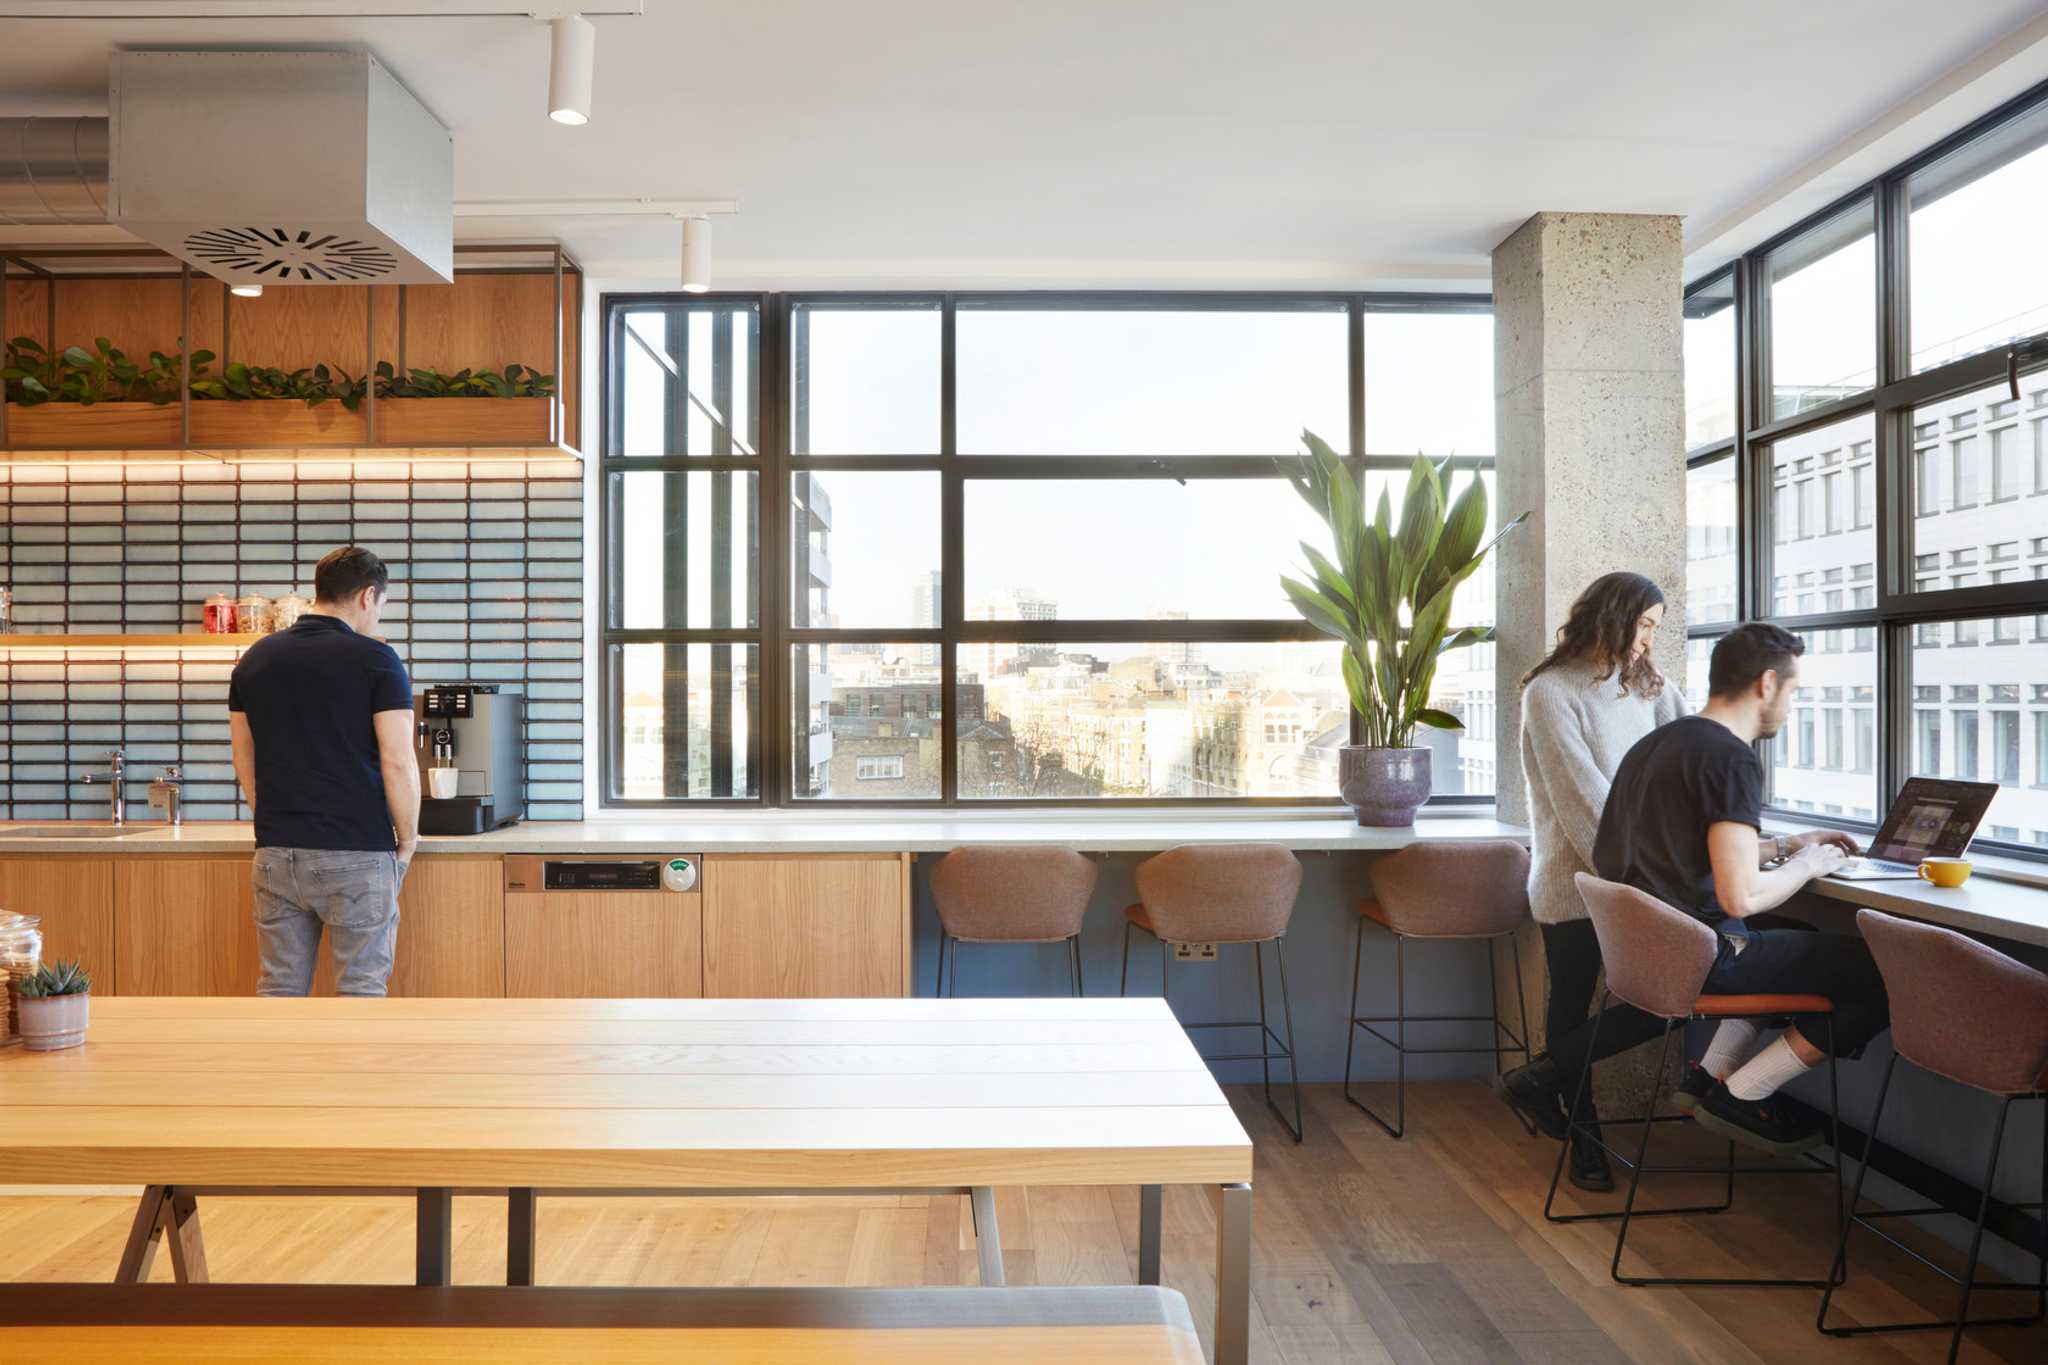 Coworkers using a communal kitchen and shared workspace in a London office space.